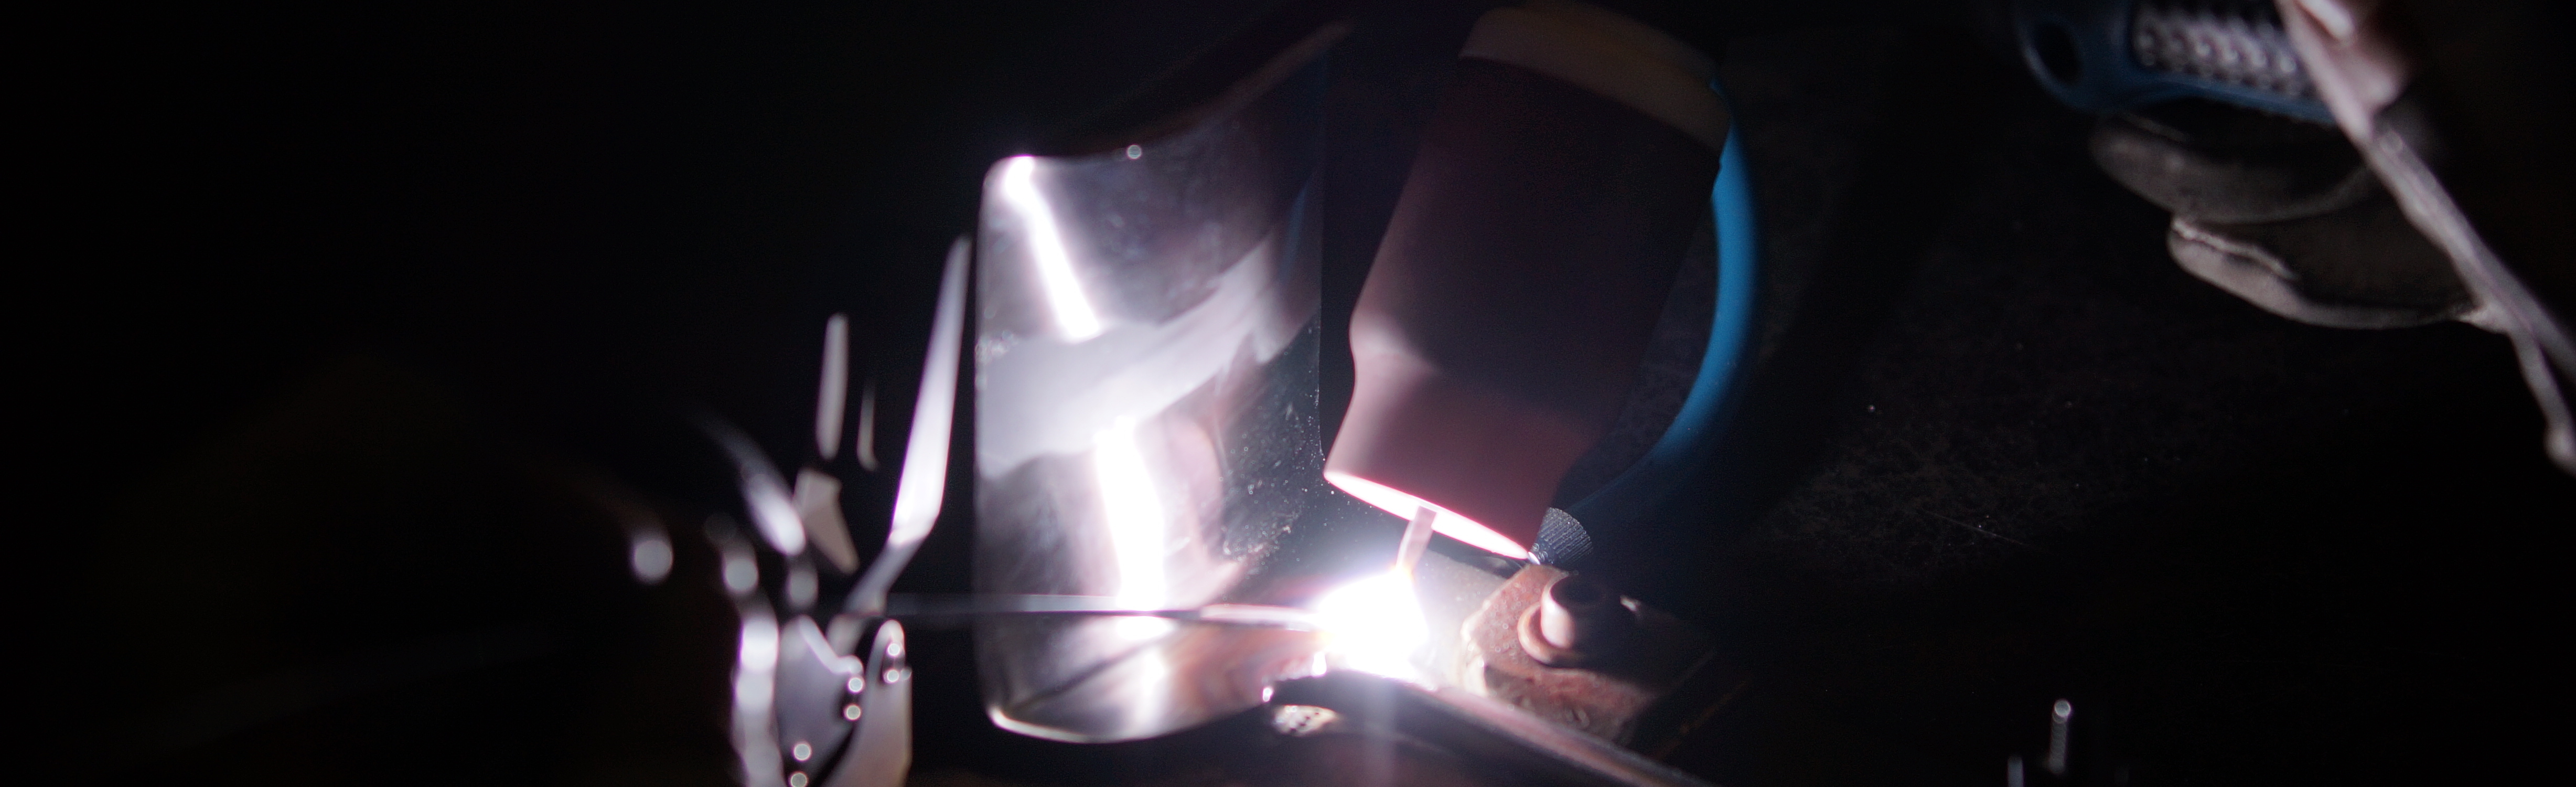 TIG welding of surgical instruments